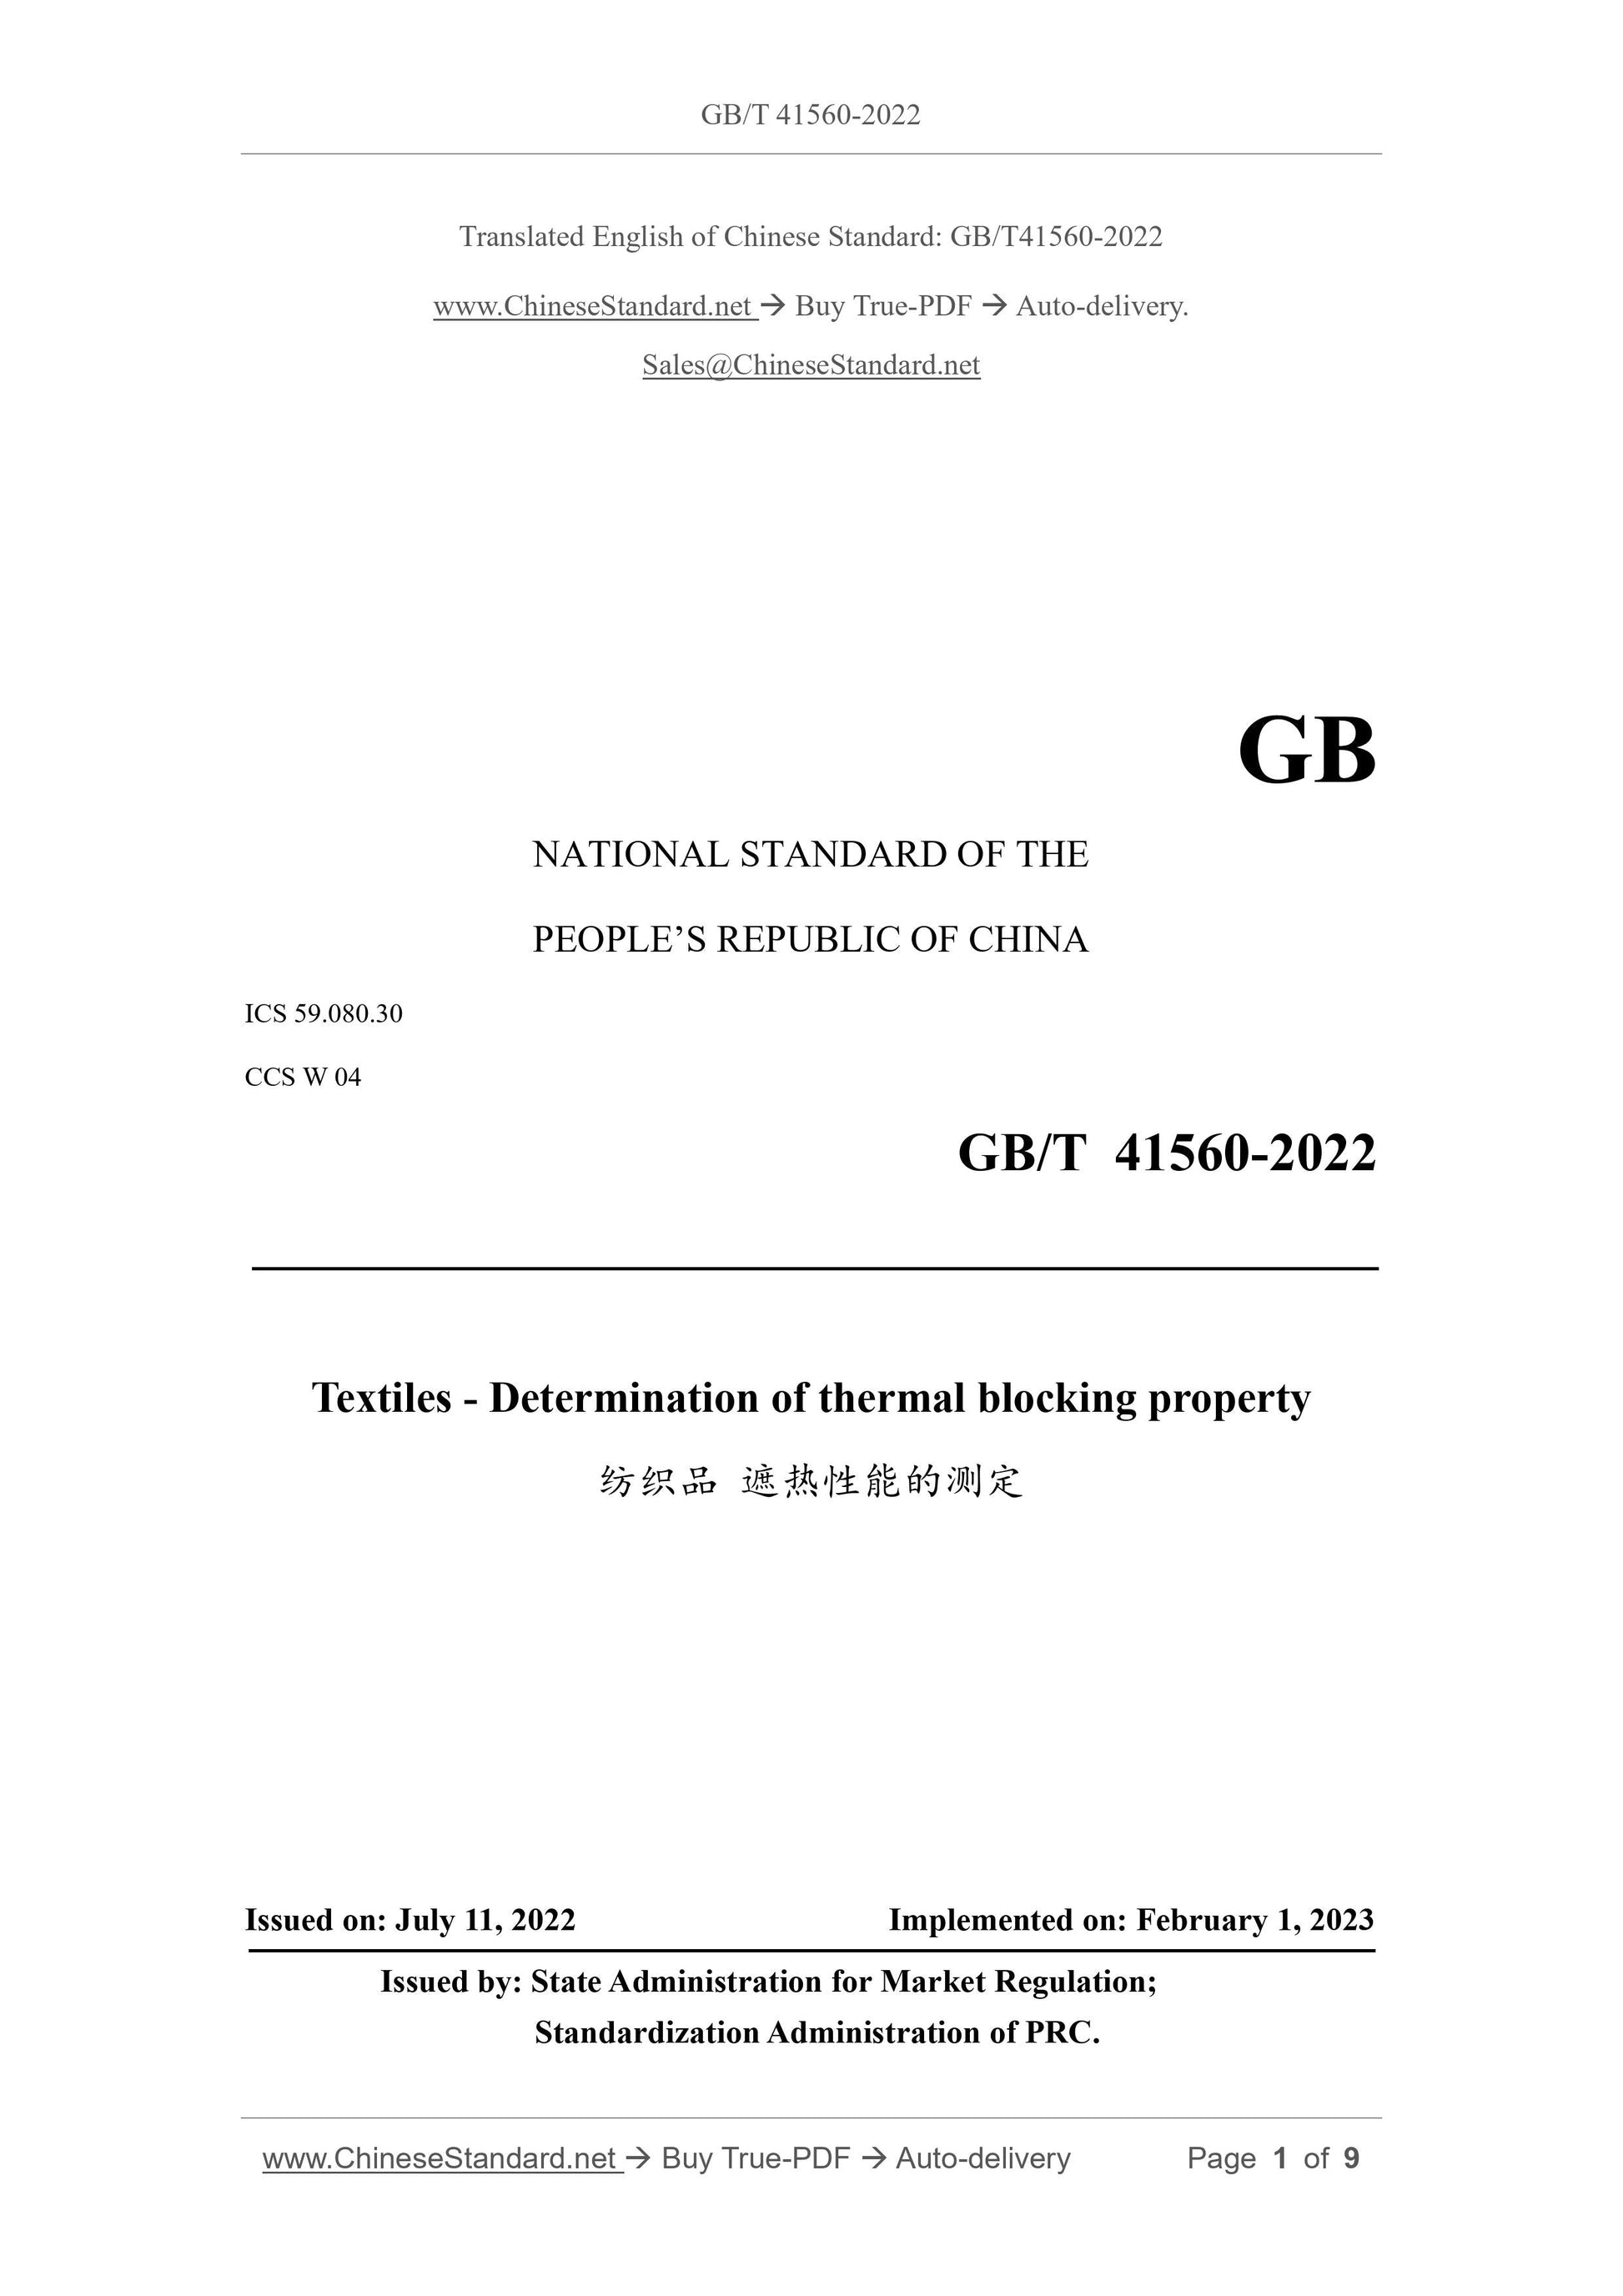 GB/T 41560-2022 Page 1